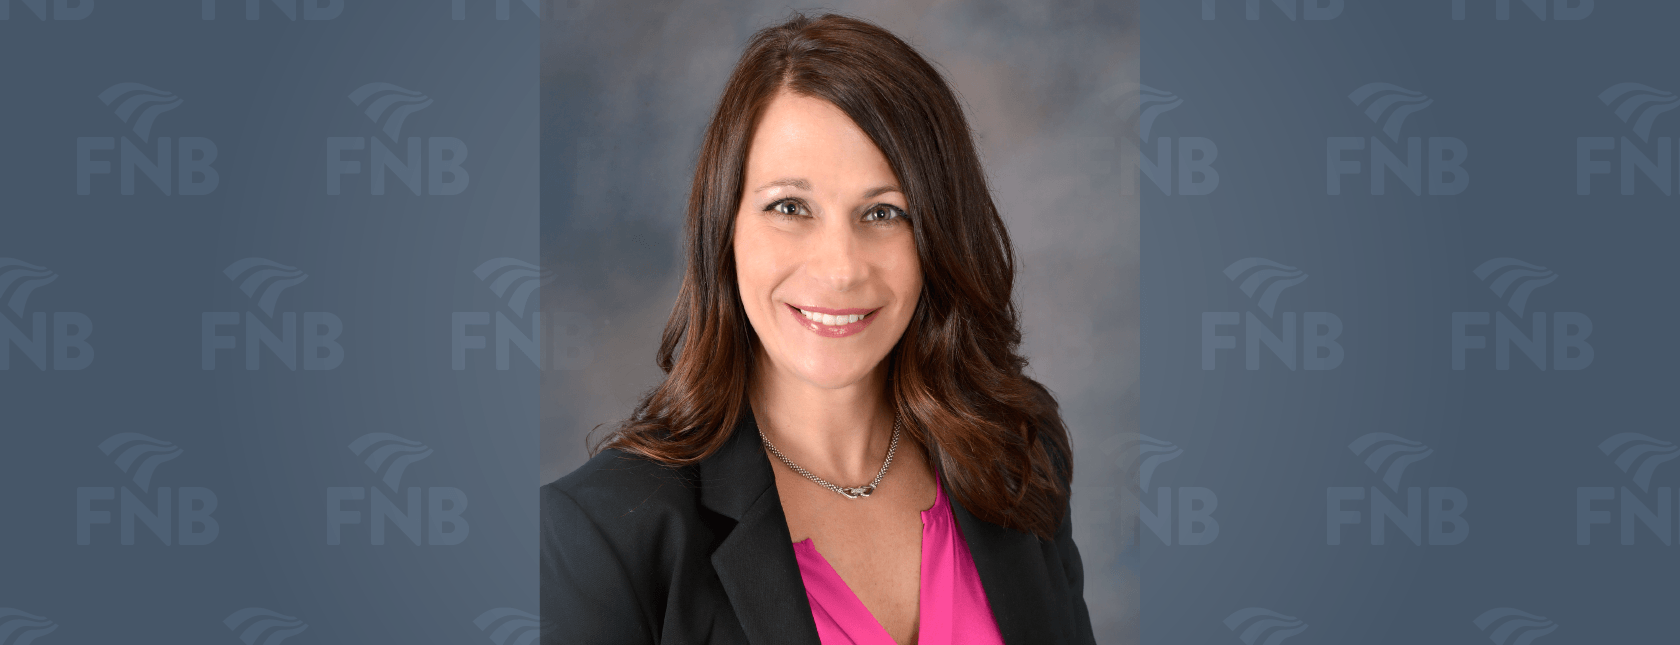 Annie Suiter Joins FNB Bank